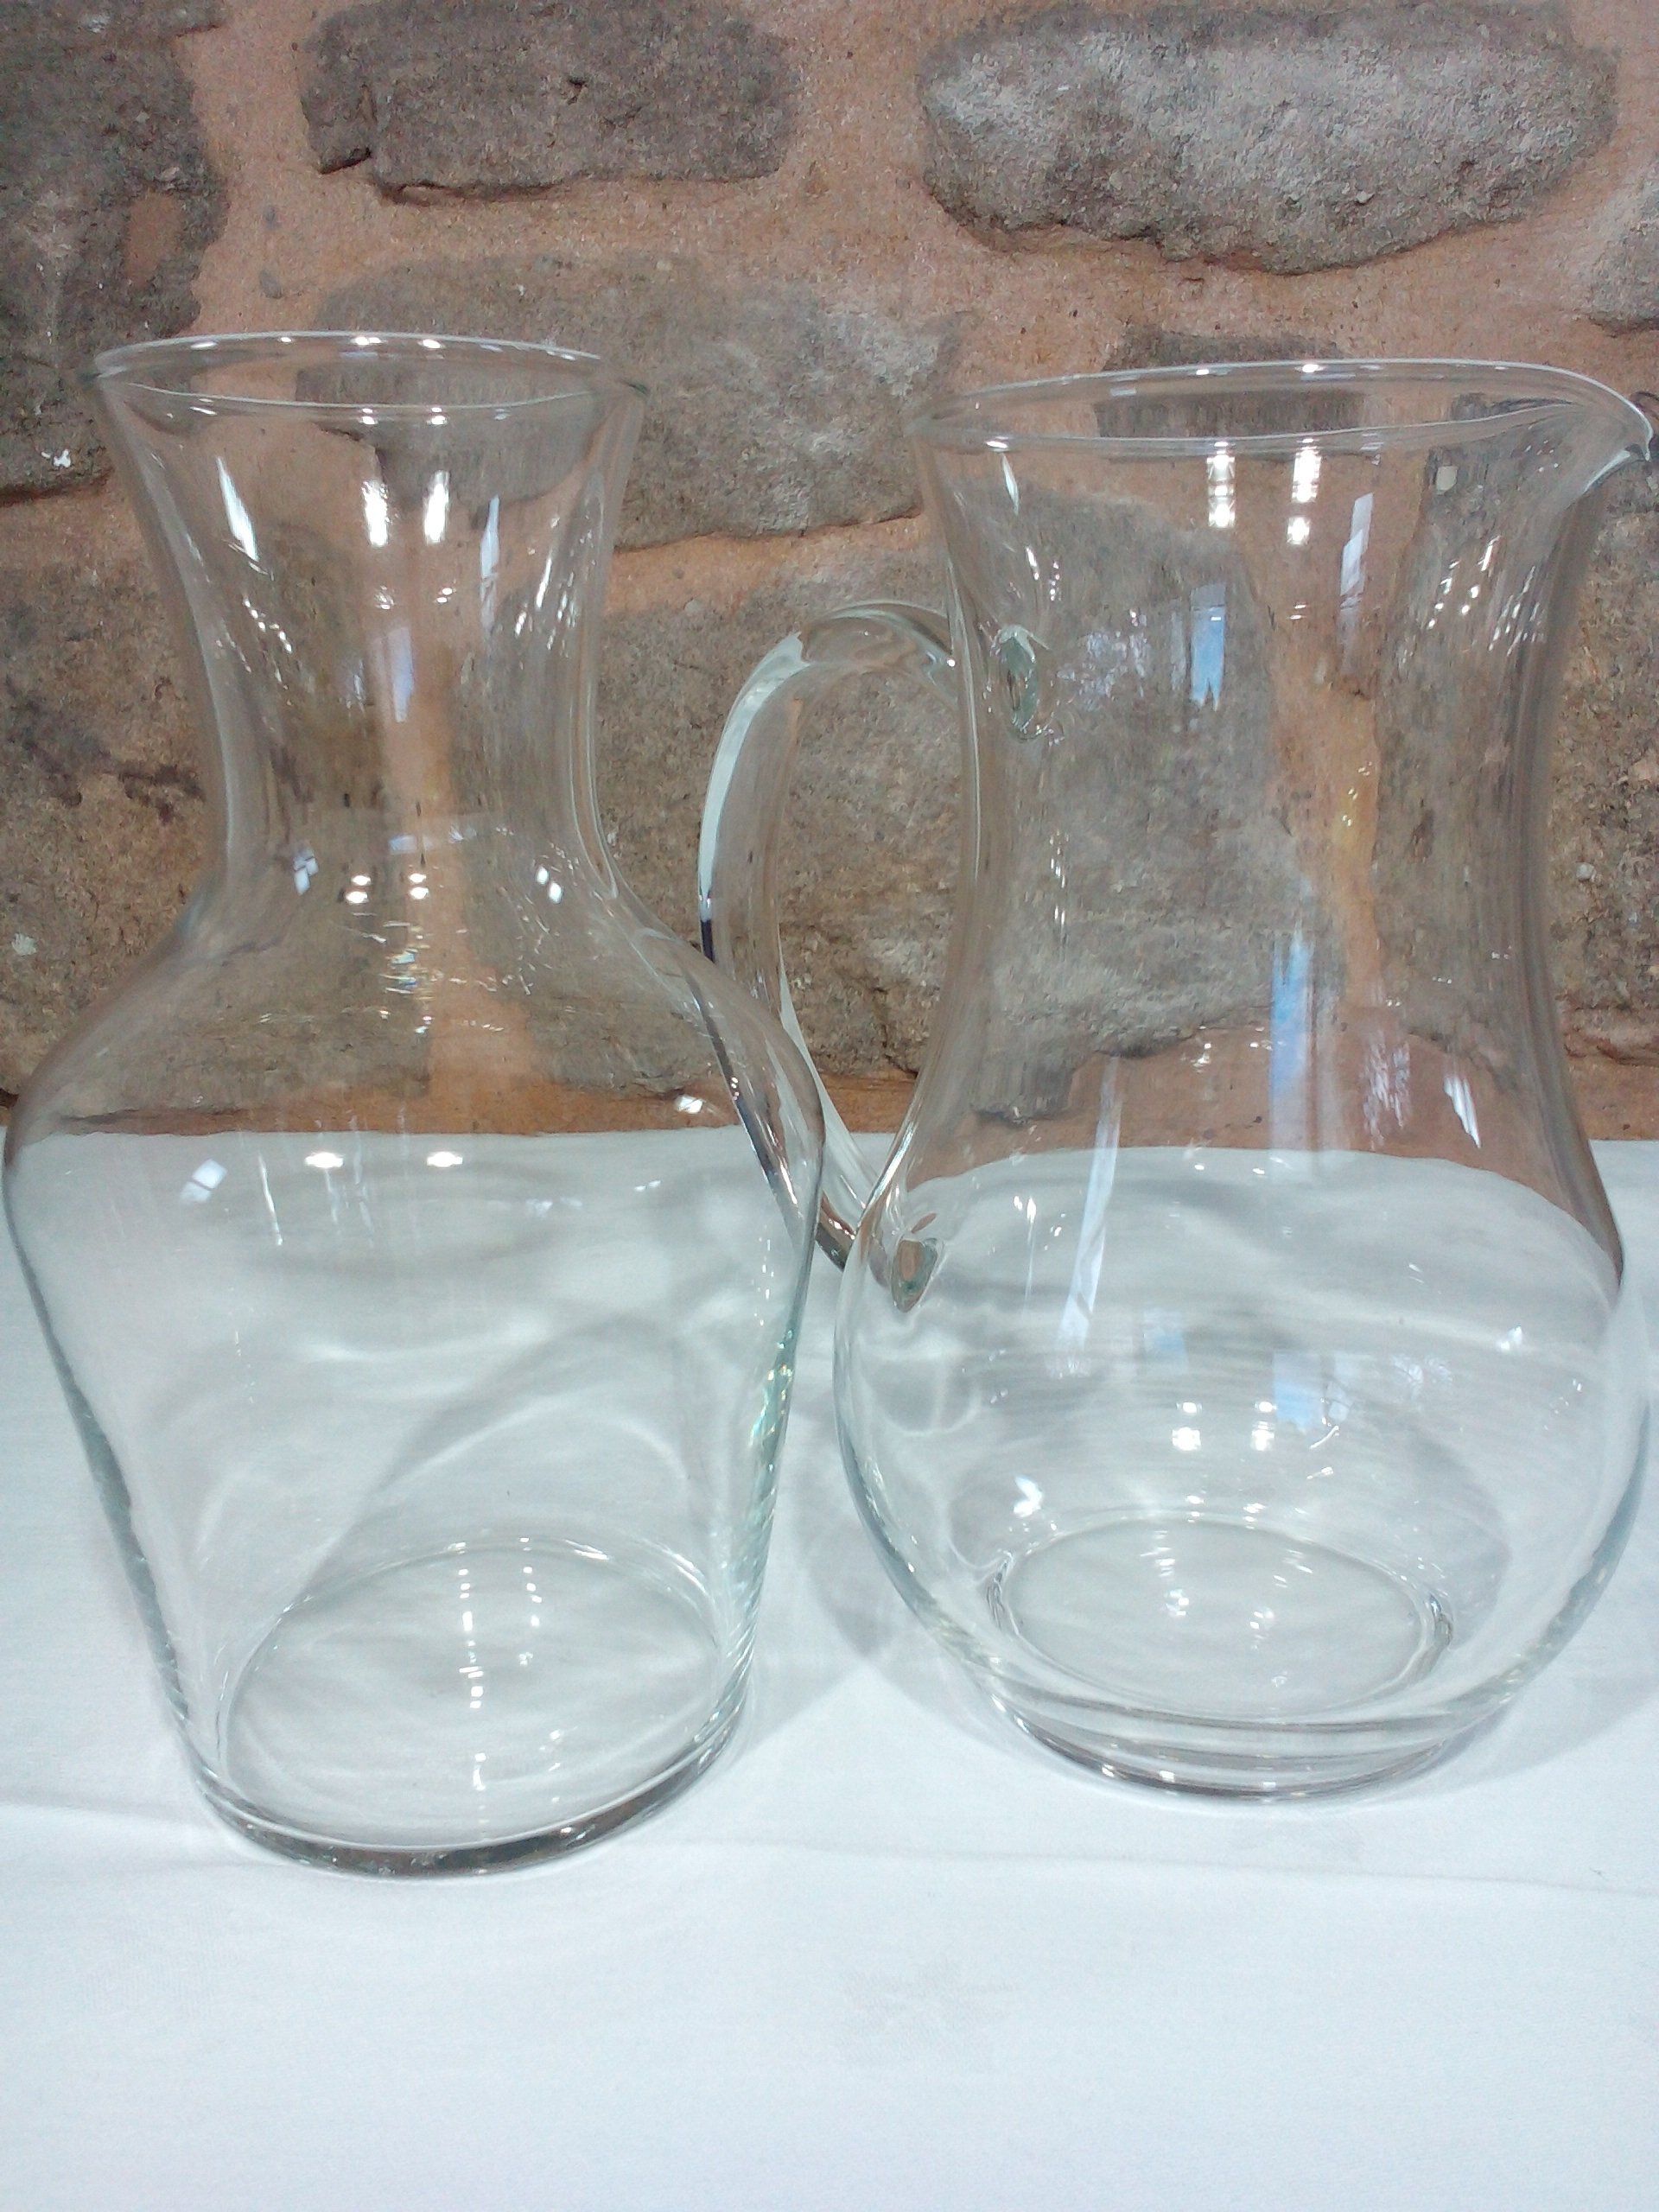 Jug and Carafe Hire Return Clean or Dirty Option Available